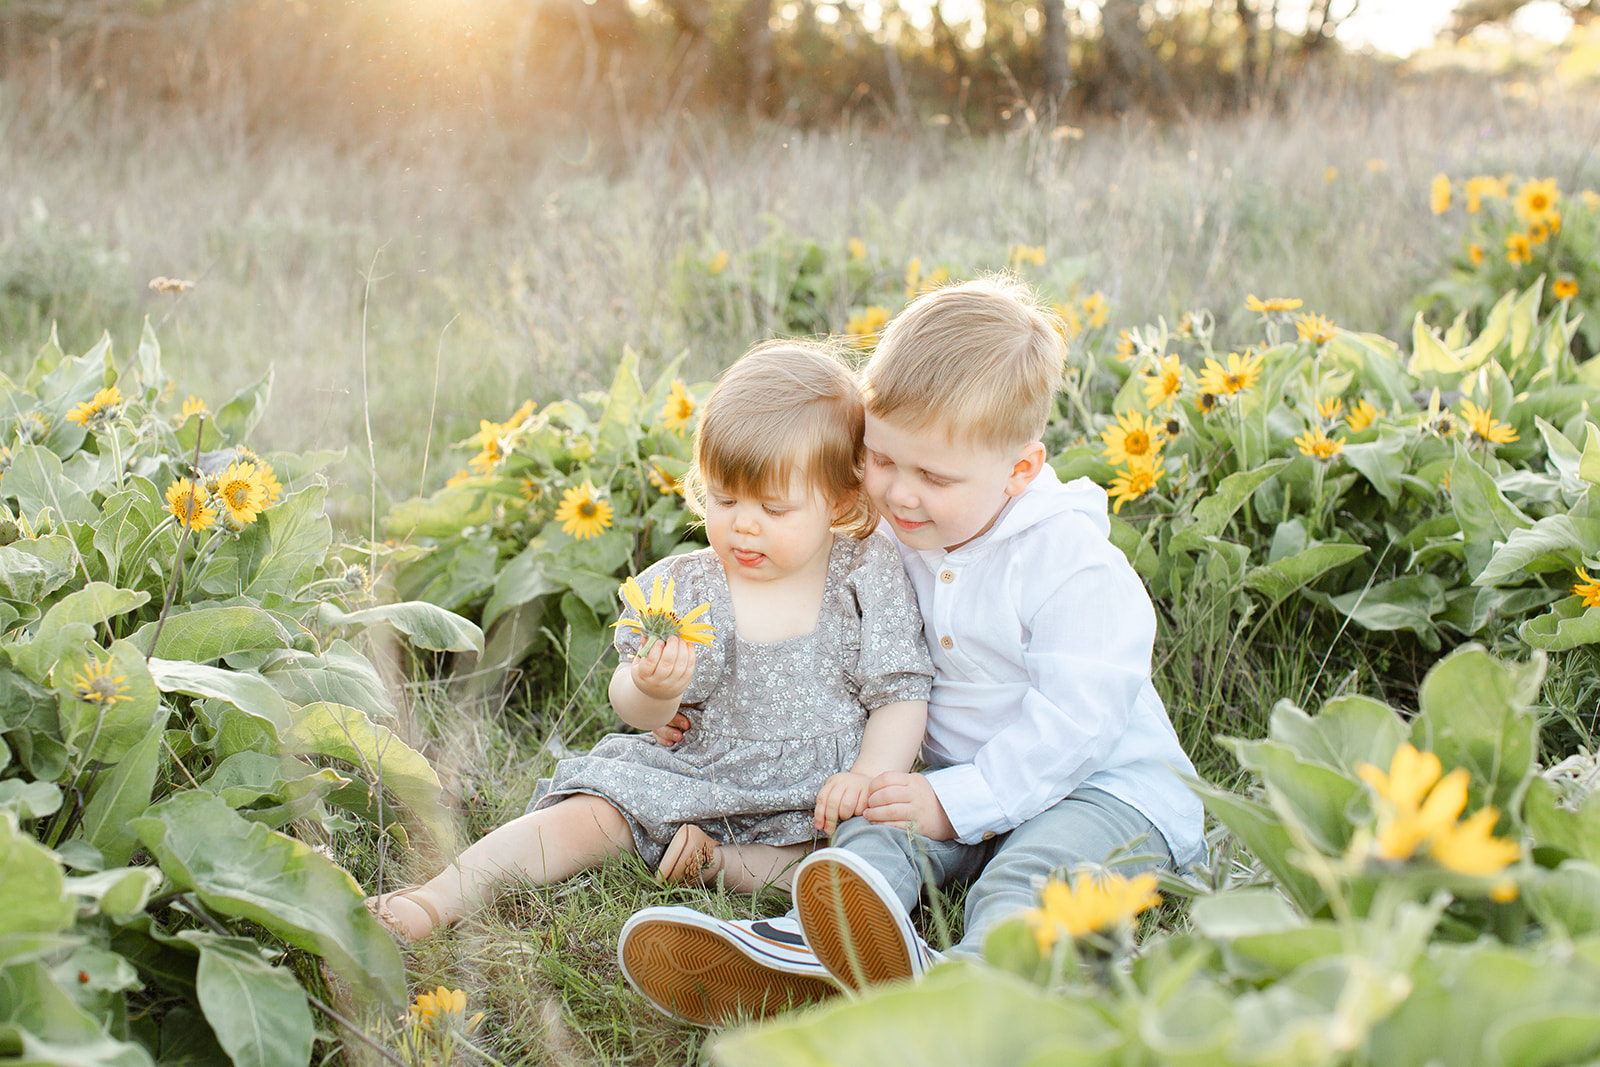 A toddler boy hugs on his little sister as they sit among wildflowers in a park at sunset